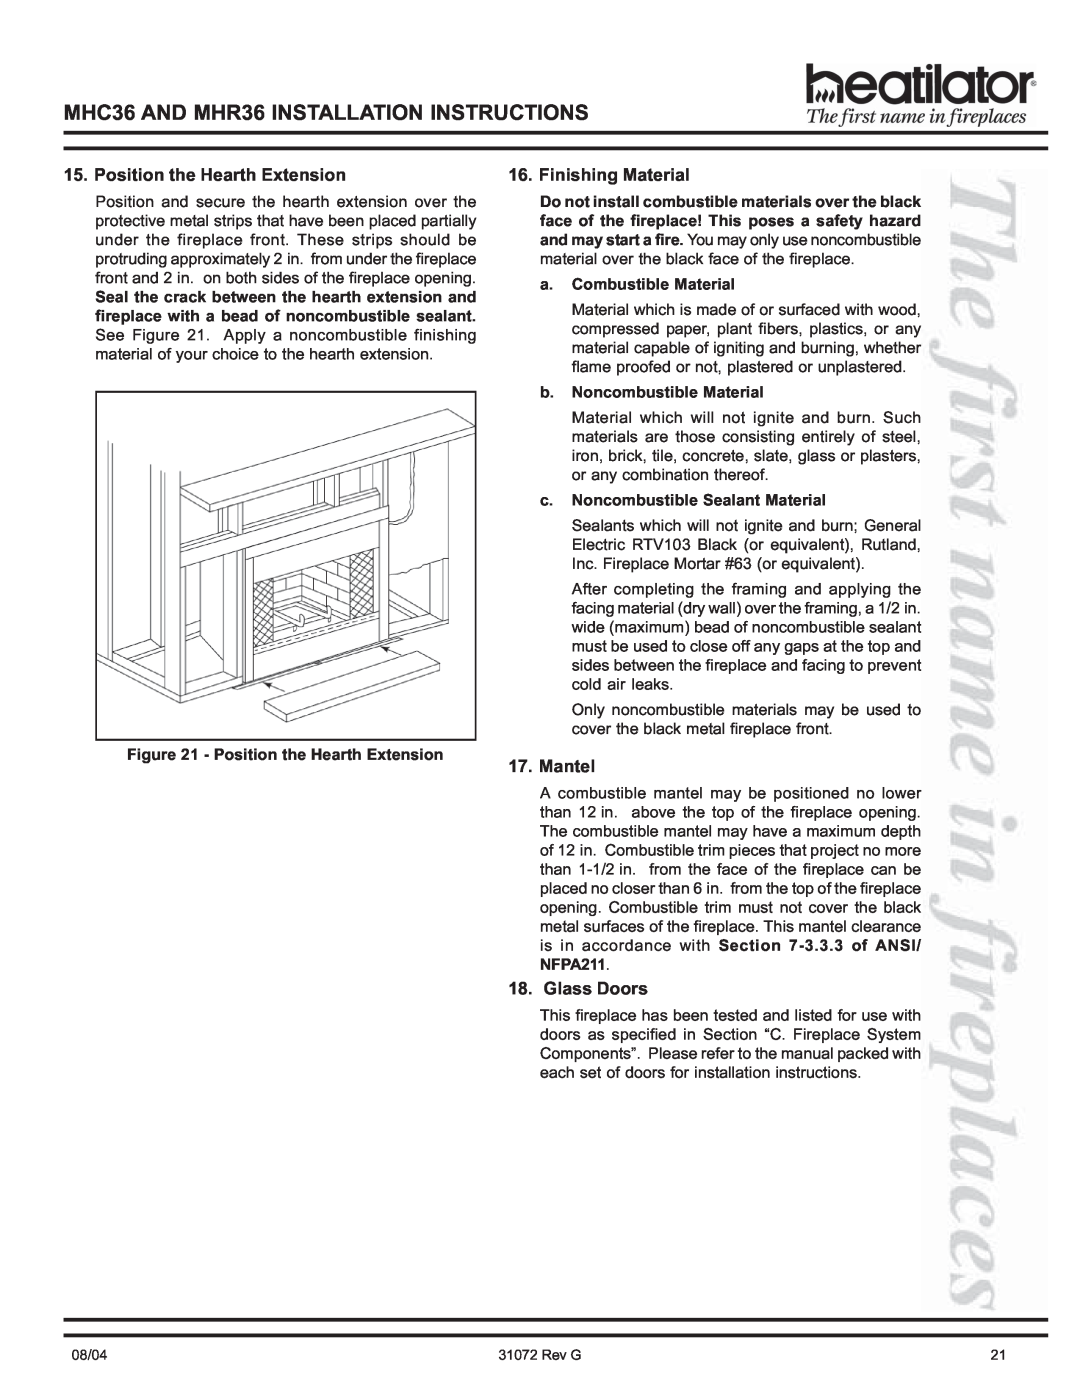 Heart & Home Collectables MHR36, MHC36 manual Position the Hearth Extension, Finishing Material, Mantel, Glass Doors 